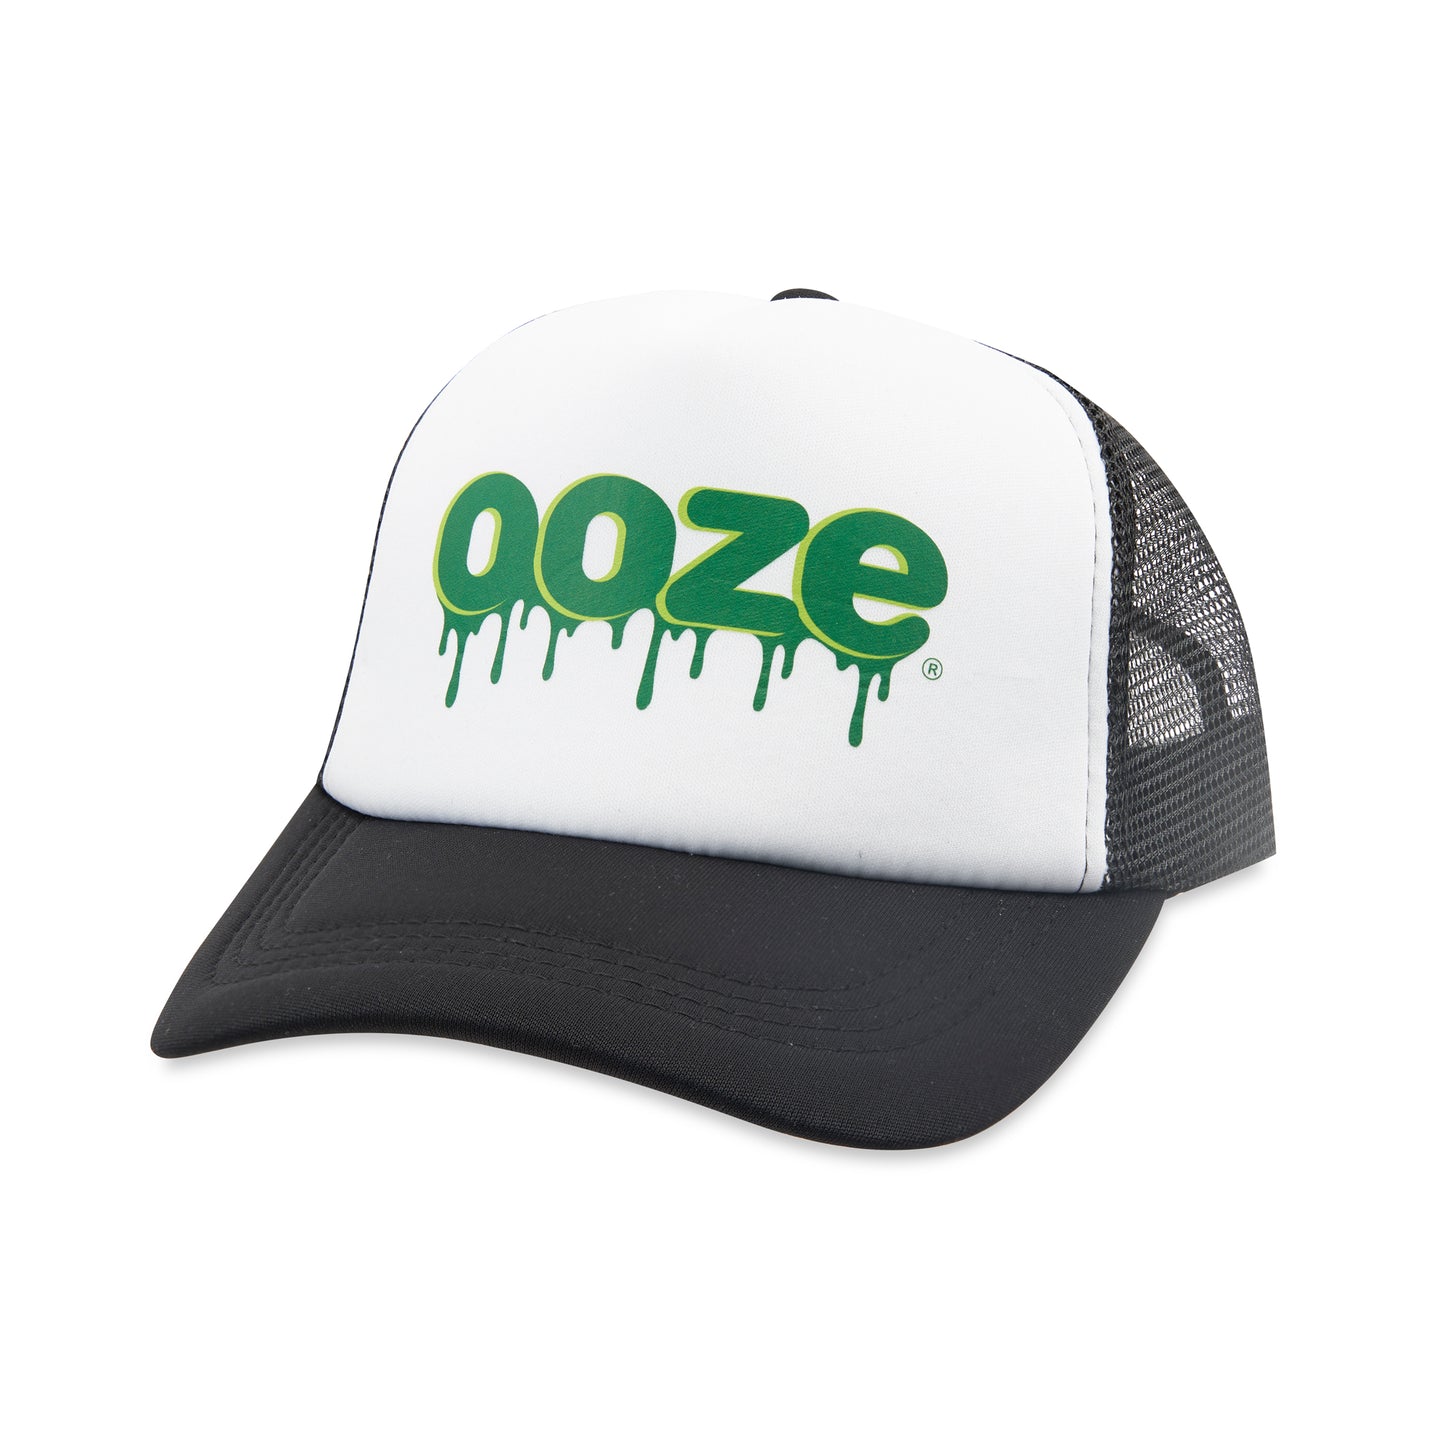 The black and white Ooze Trucker Hat is angled slightly to the left to show the black mesh back